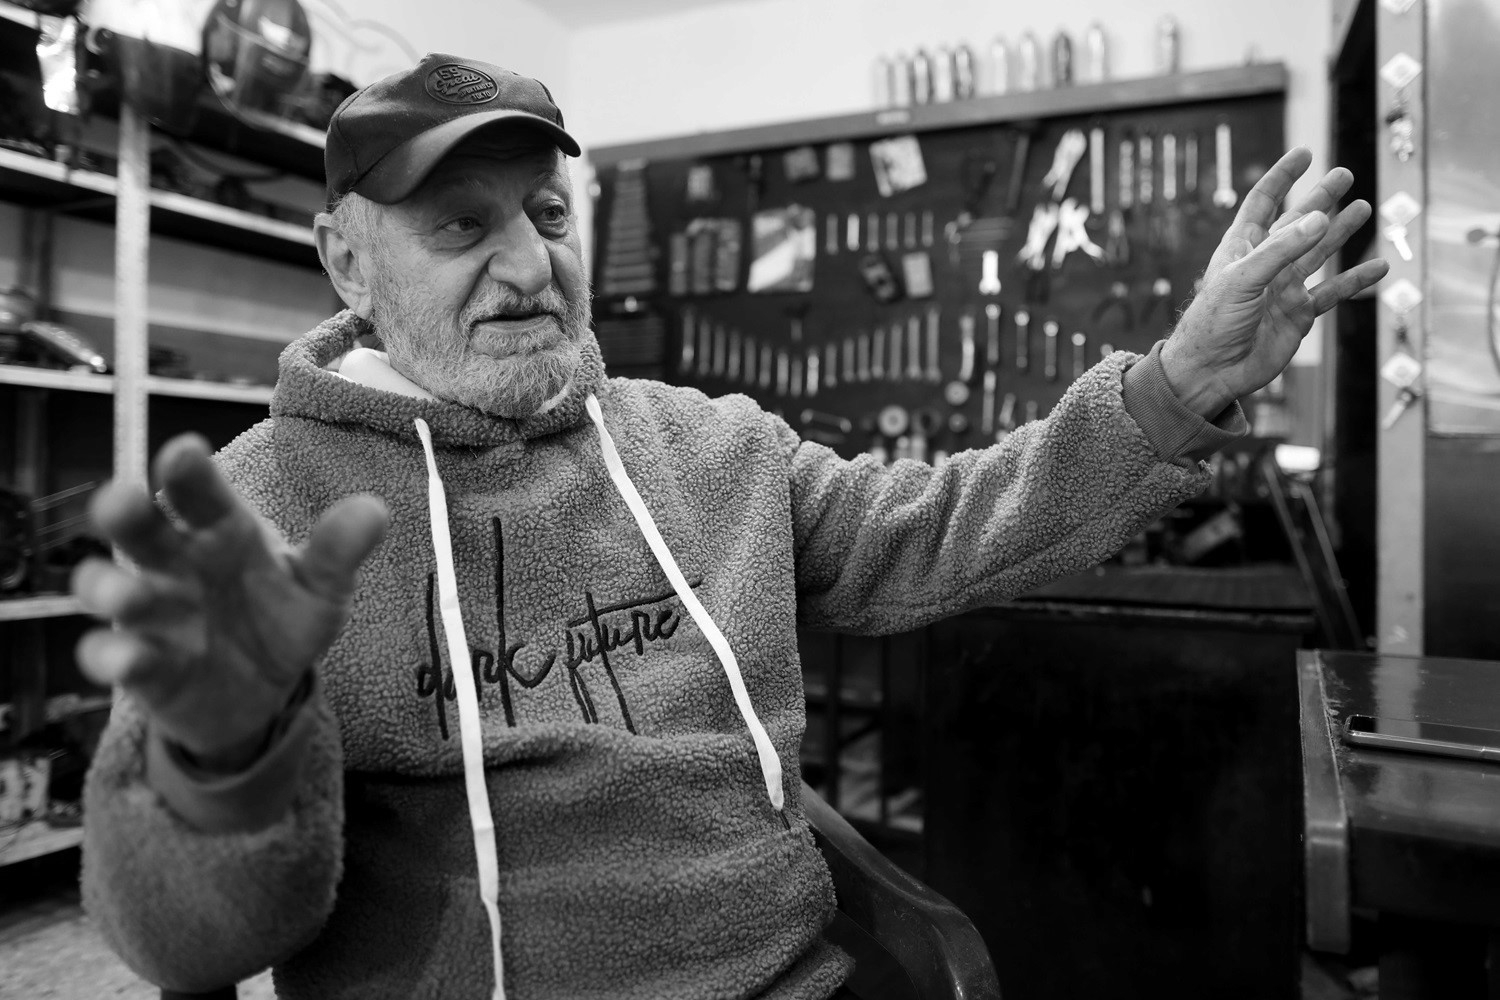 A man with a thick mustache wearing a baseball cap and hoodie speaks, and motions with his hands.